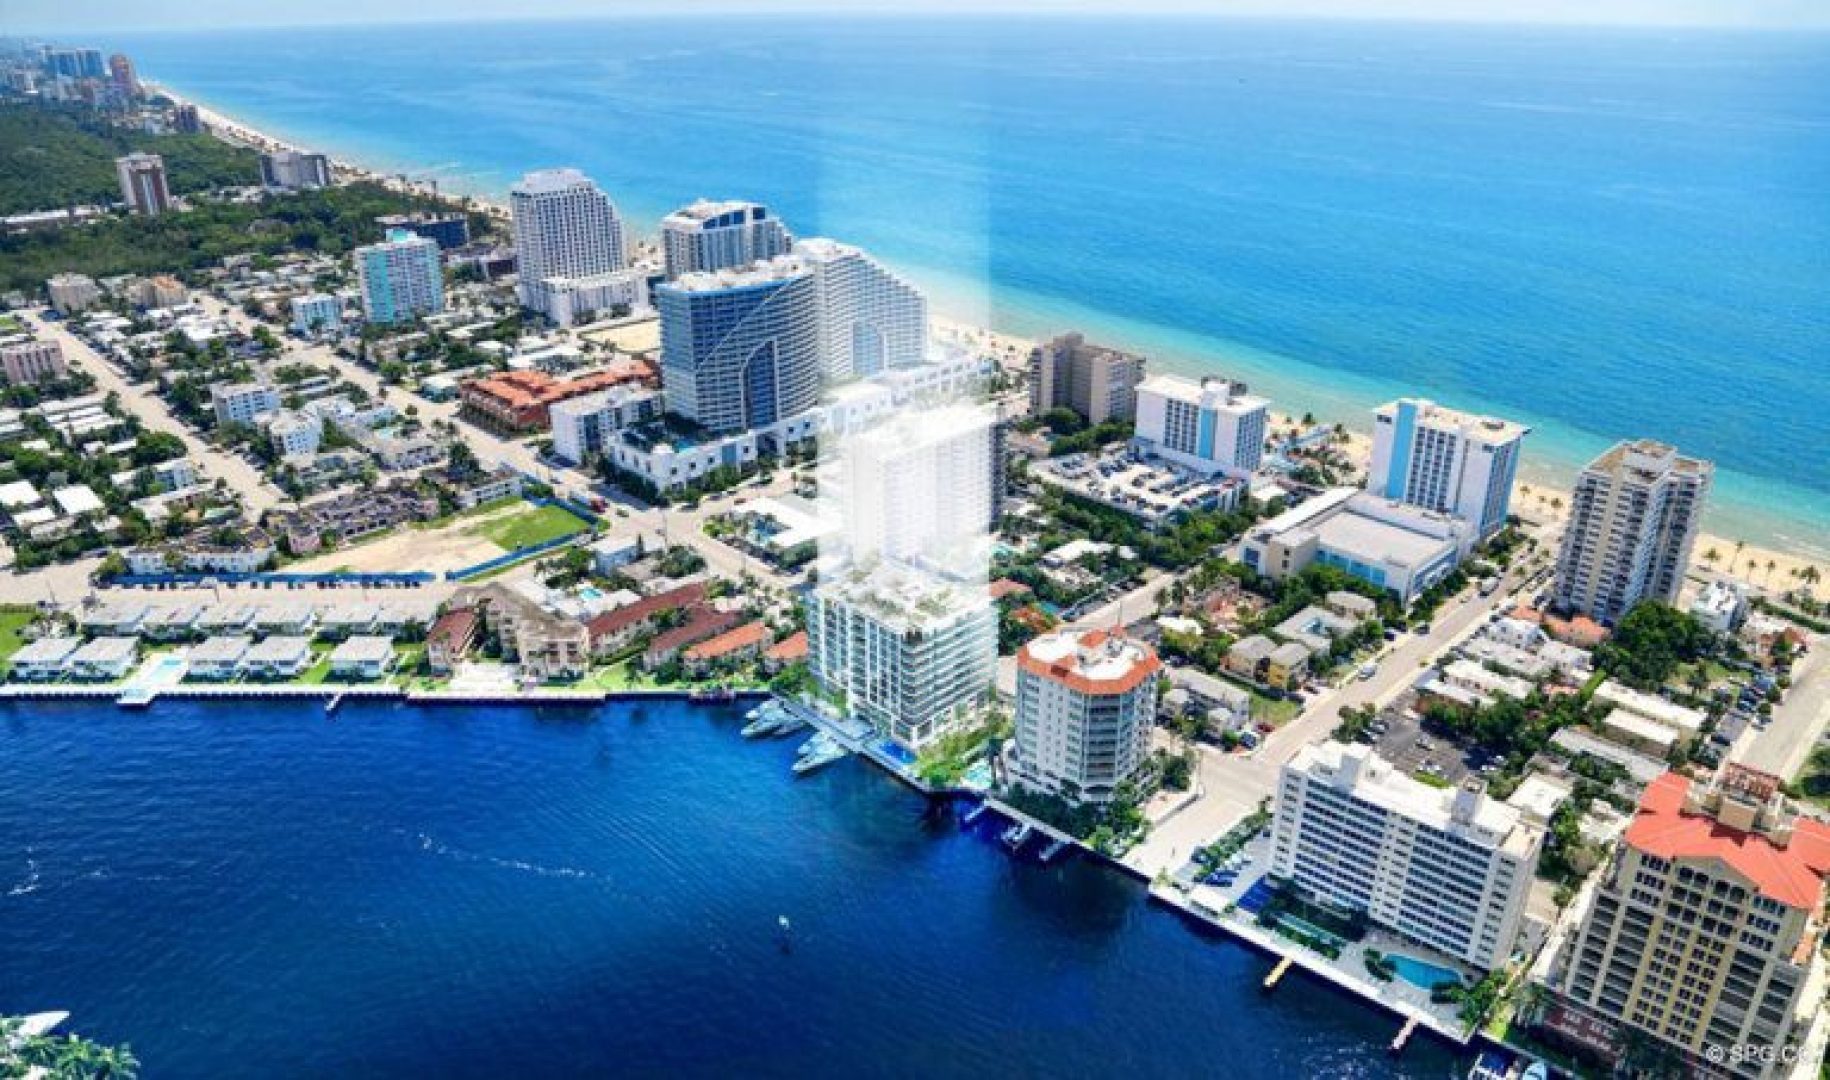 Northern View of 321 at Water's Edge, Luxury Waterfront Condos in Fort Lauderdale, Florida 33304